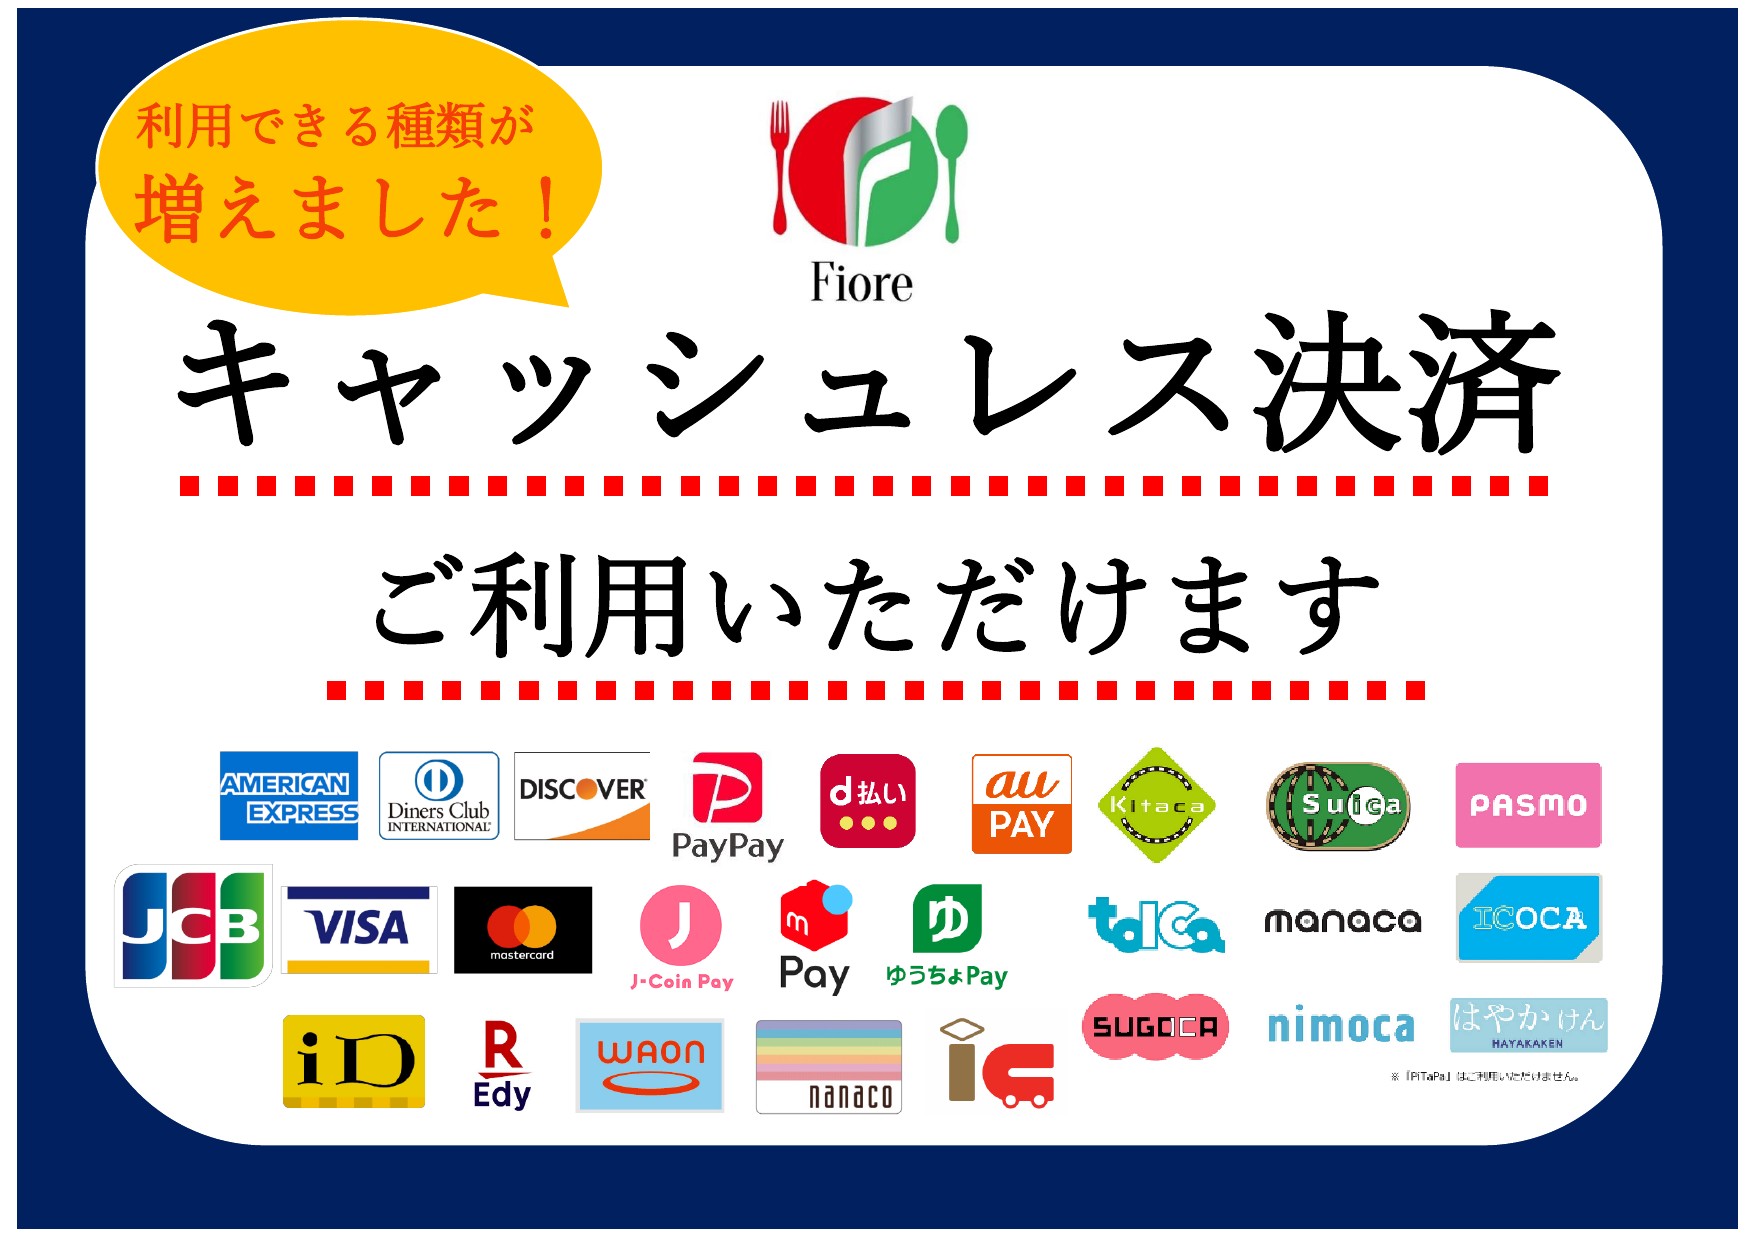 AMERICAN EXPRESS / Diners Club INTERNATIONAL / DISCOVER / JCB / VISA / mastercard / PayPay / d払い / au PAY / J-Coin Pay / m Pay / ゆうちょPay / iD / Edy / WAON / nanaco / 交通系ICカード